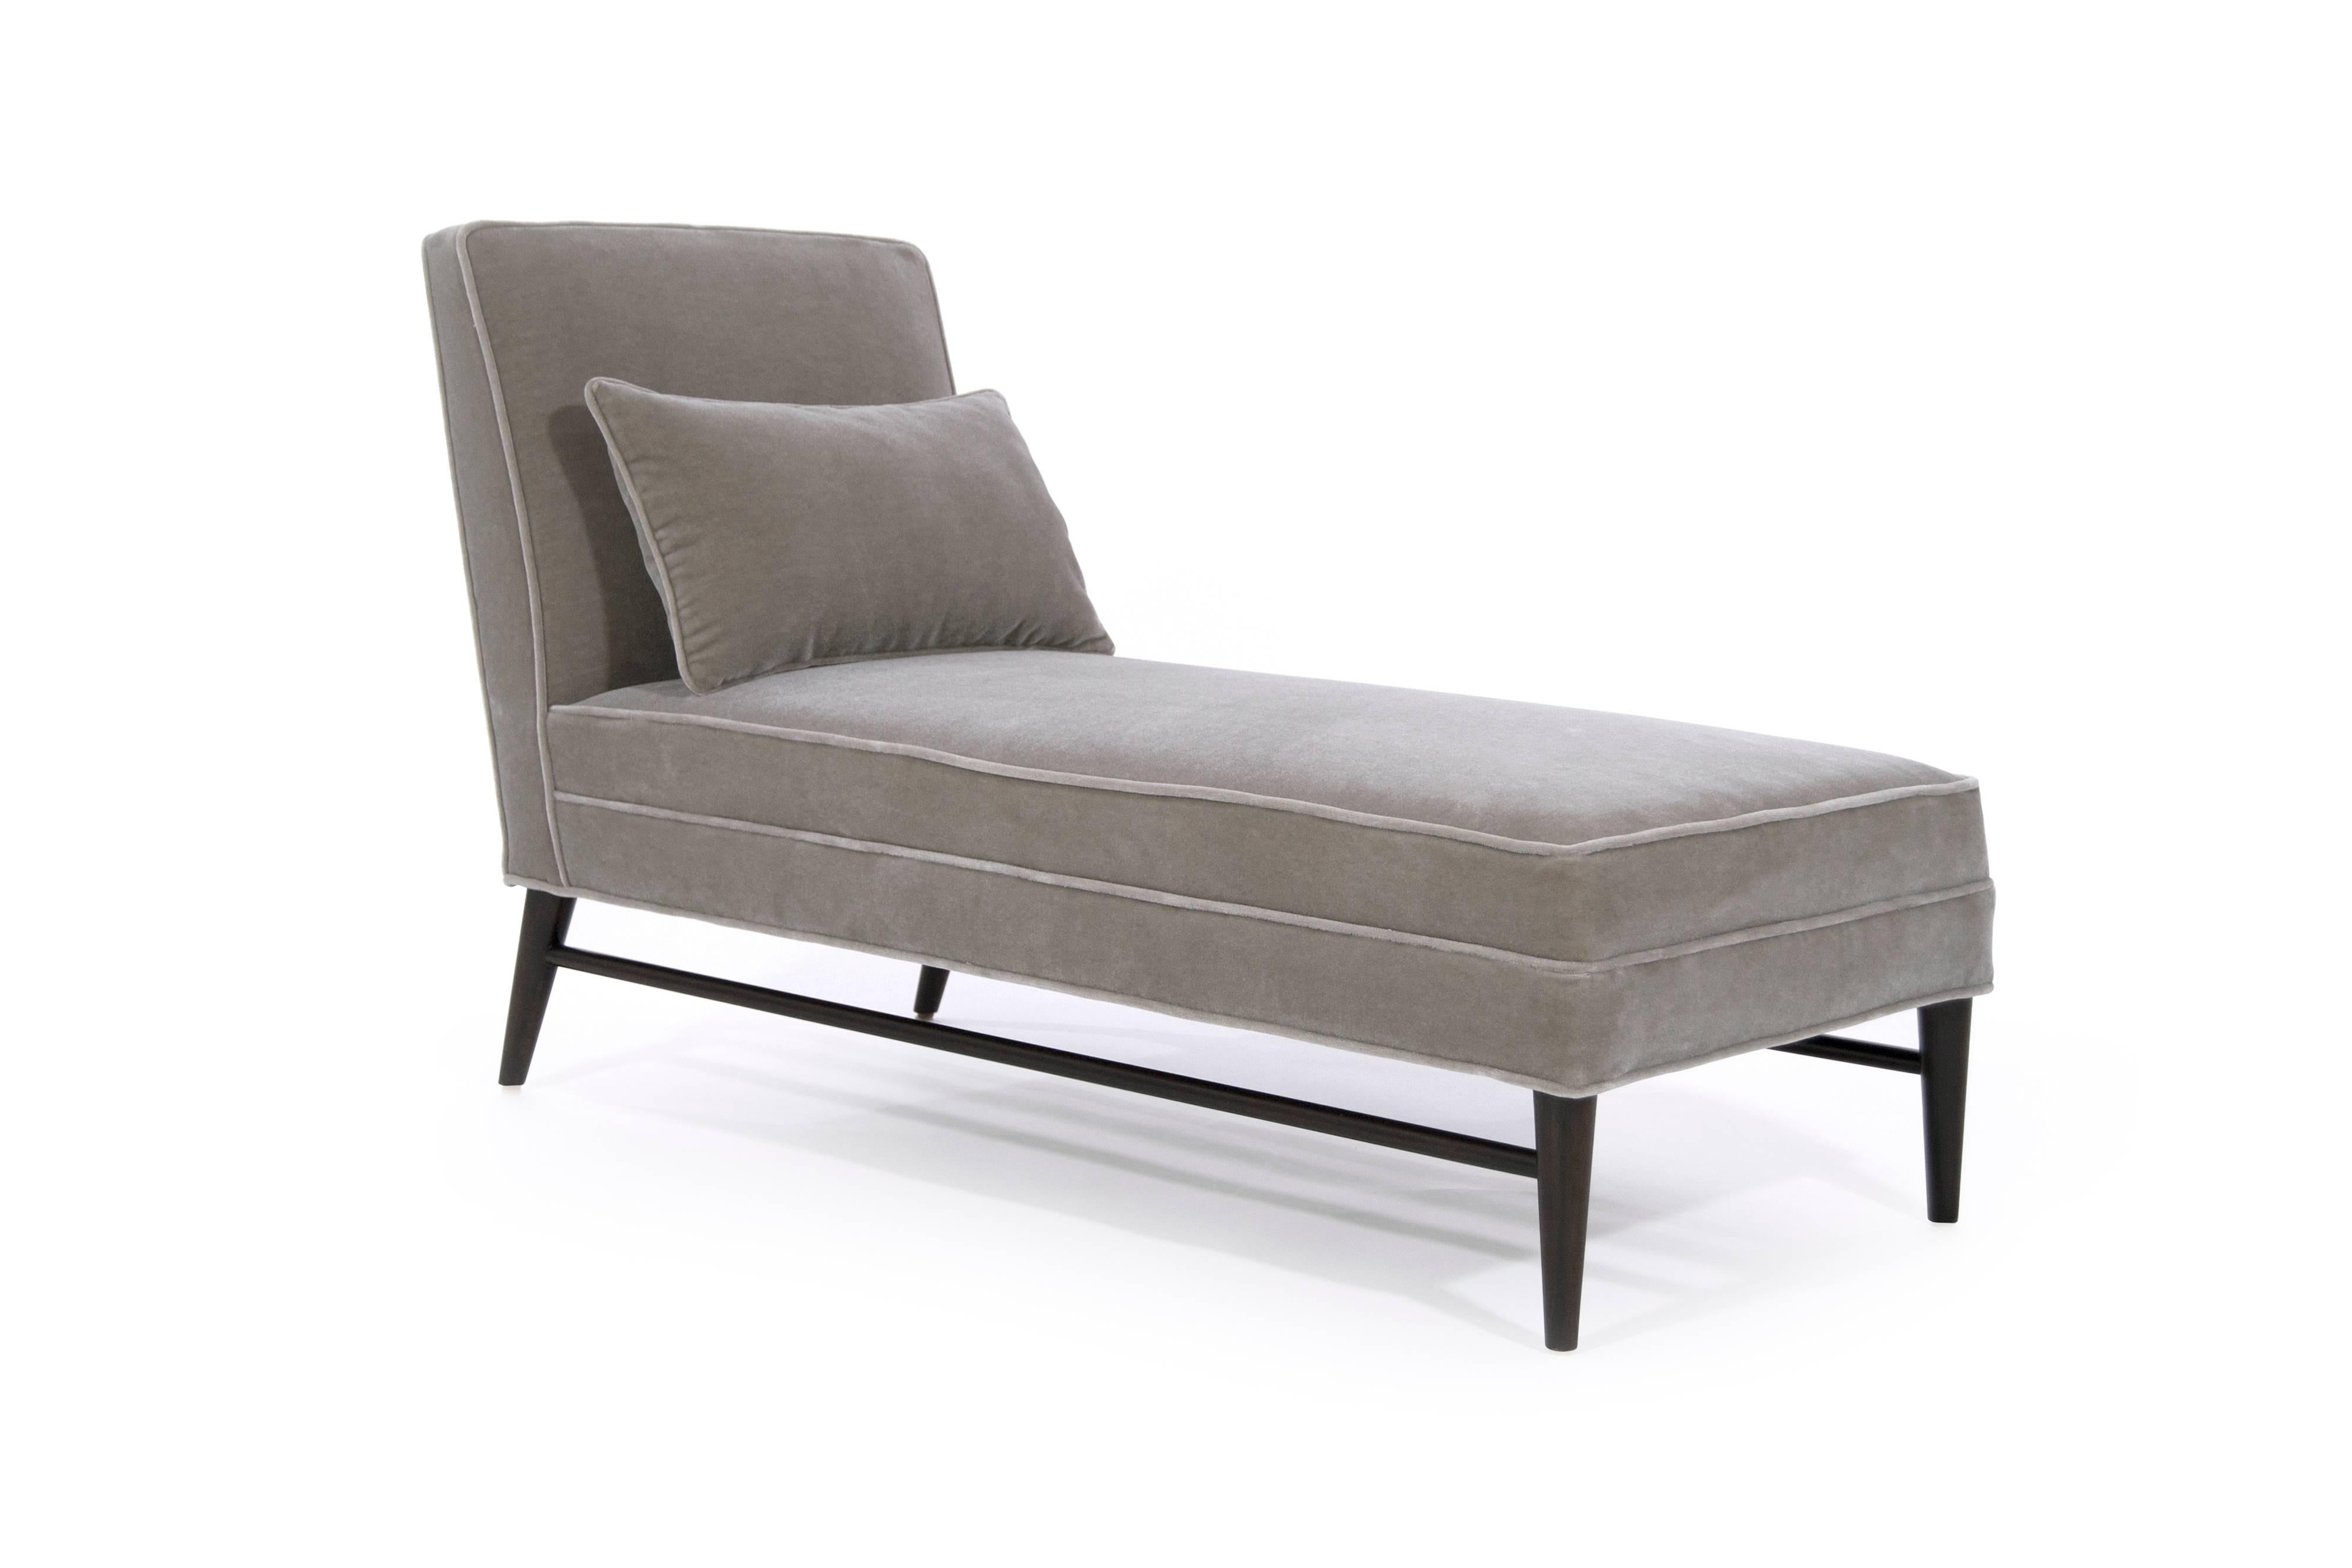 American Paul McCobb for Directional Chaise Lounge in Mohair